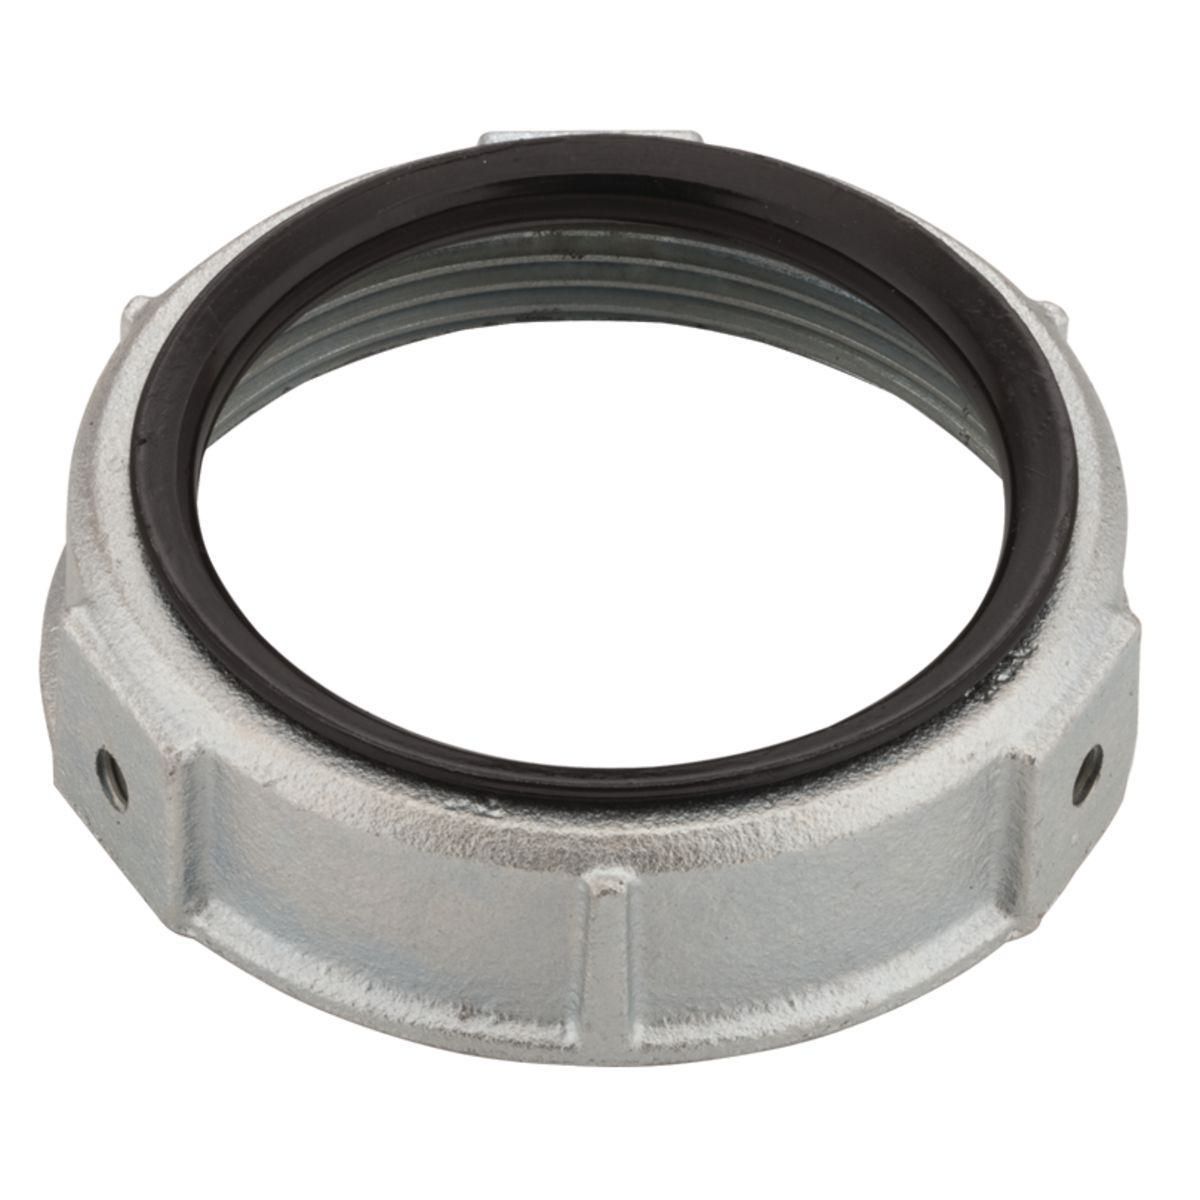 BUSHING 2-1/2 IN INSULATED MALL IRON